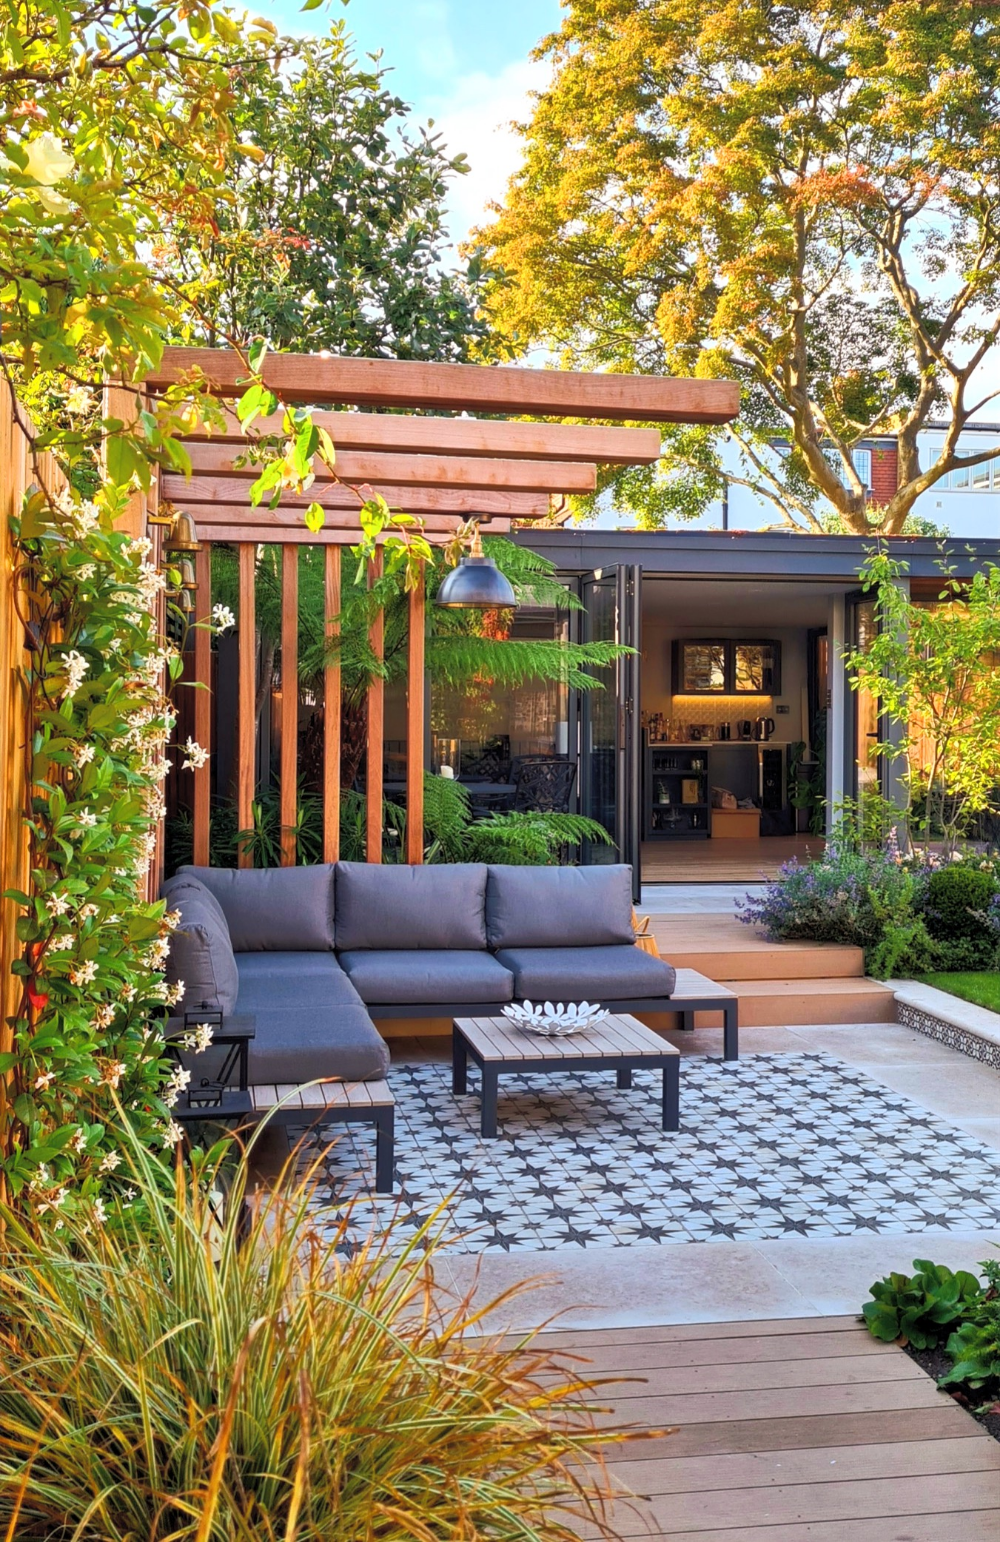 Creating an Inviting Patio Space in Your Garden